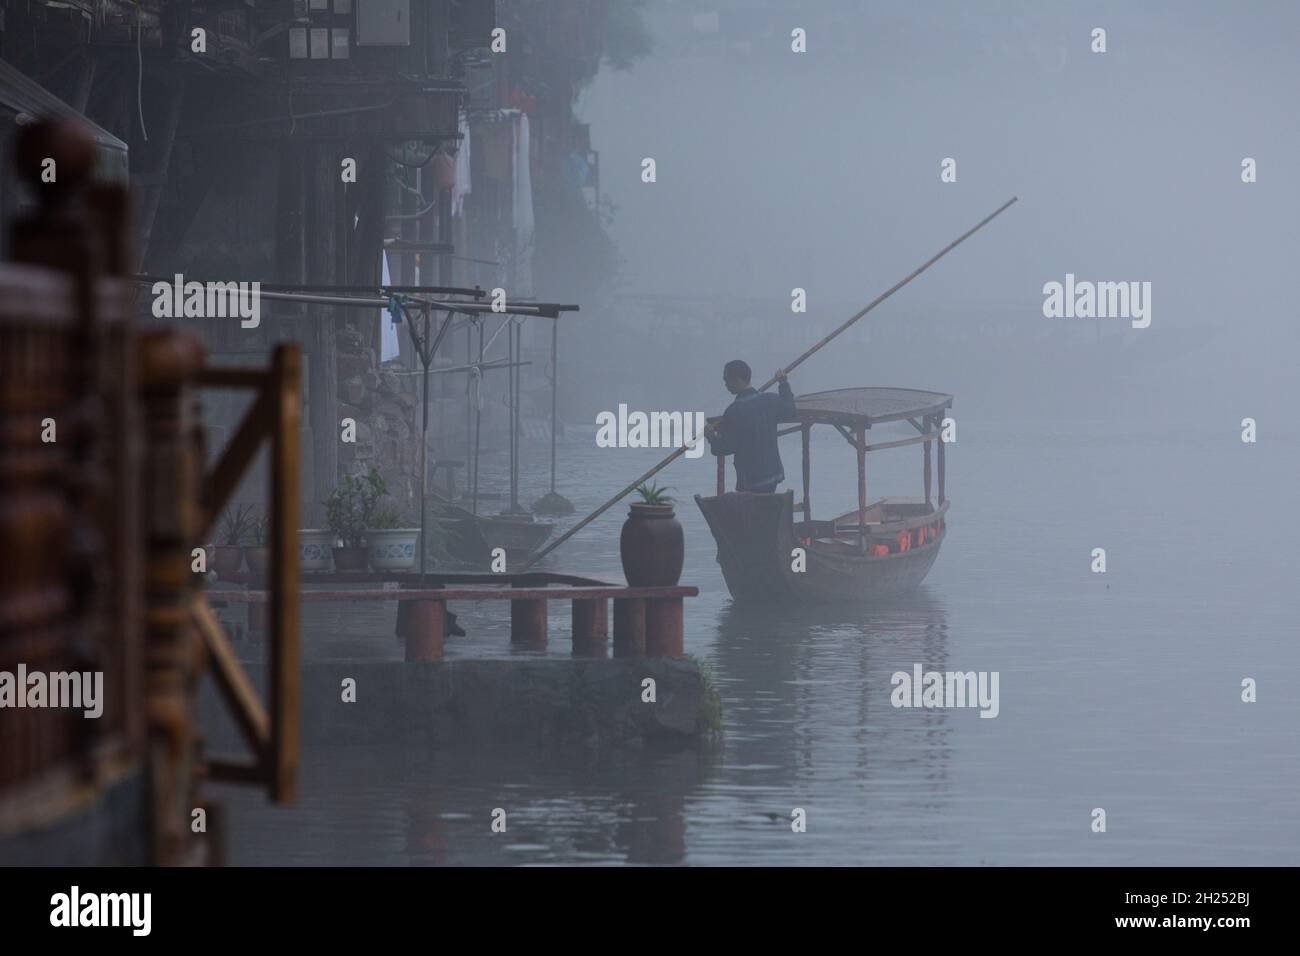 A man poles an empty covered tour boat up the Tuojiang River in early-morning fog.  Fenghuang, China. Stock Photo